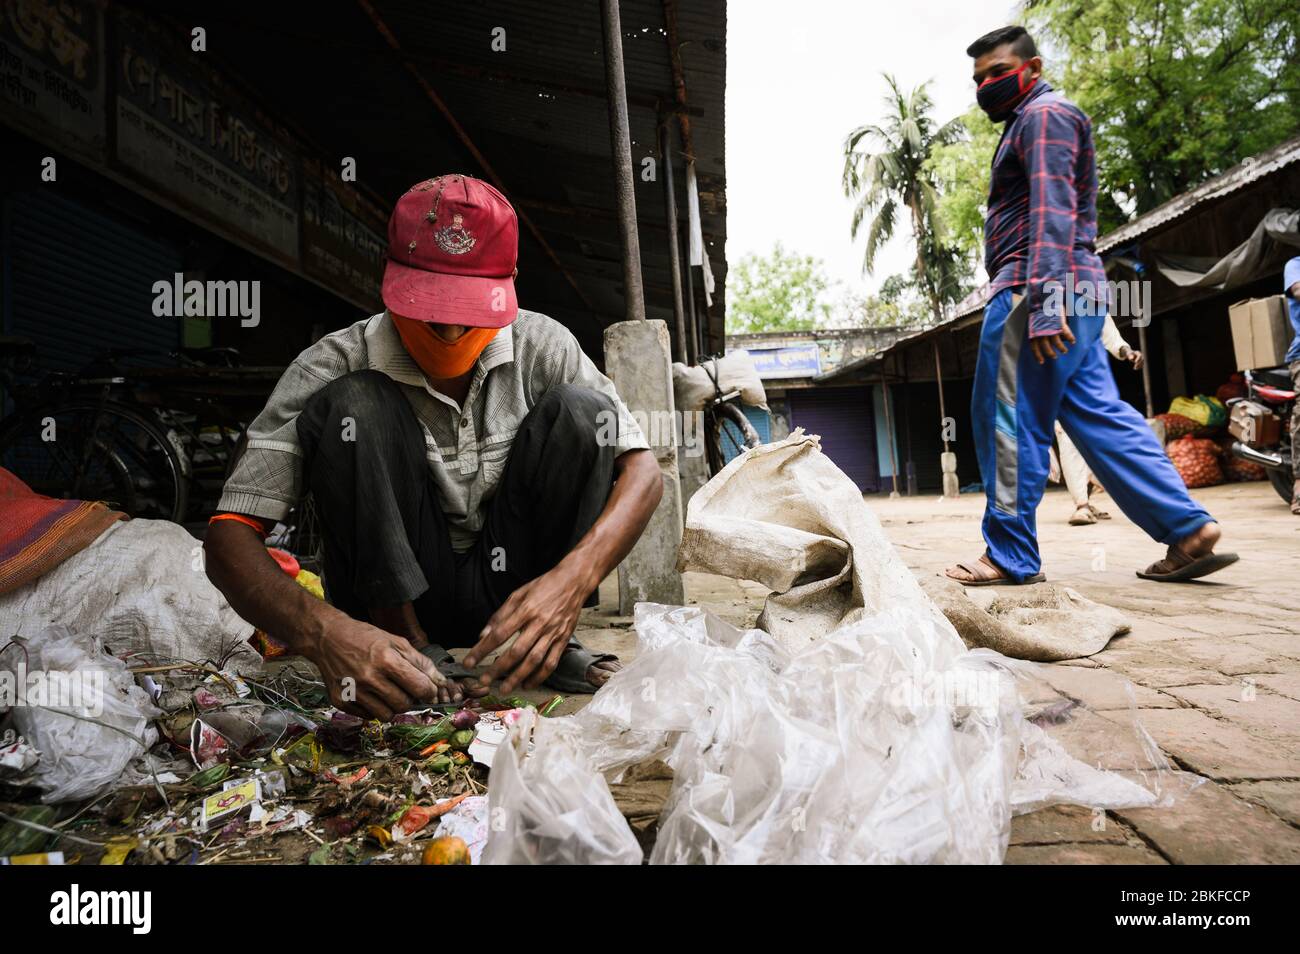 After sweeping the market the whole day a worker is collecting dry vegetables from the trash without gloves at Tehatta. The West Bengal government has identified seven of its areas as “hotspots’ of the corona virus infection, Tehatta (West Bengal, India) is one of them. So far 6 positive cases have been identified from Tehatta. Stock Photo